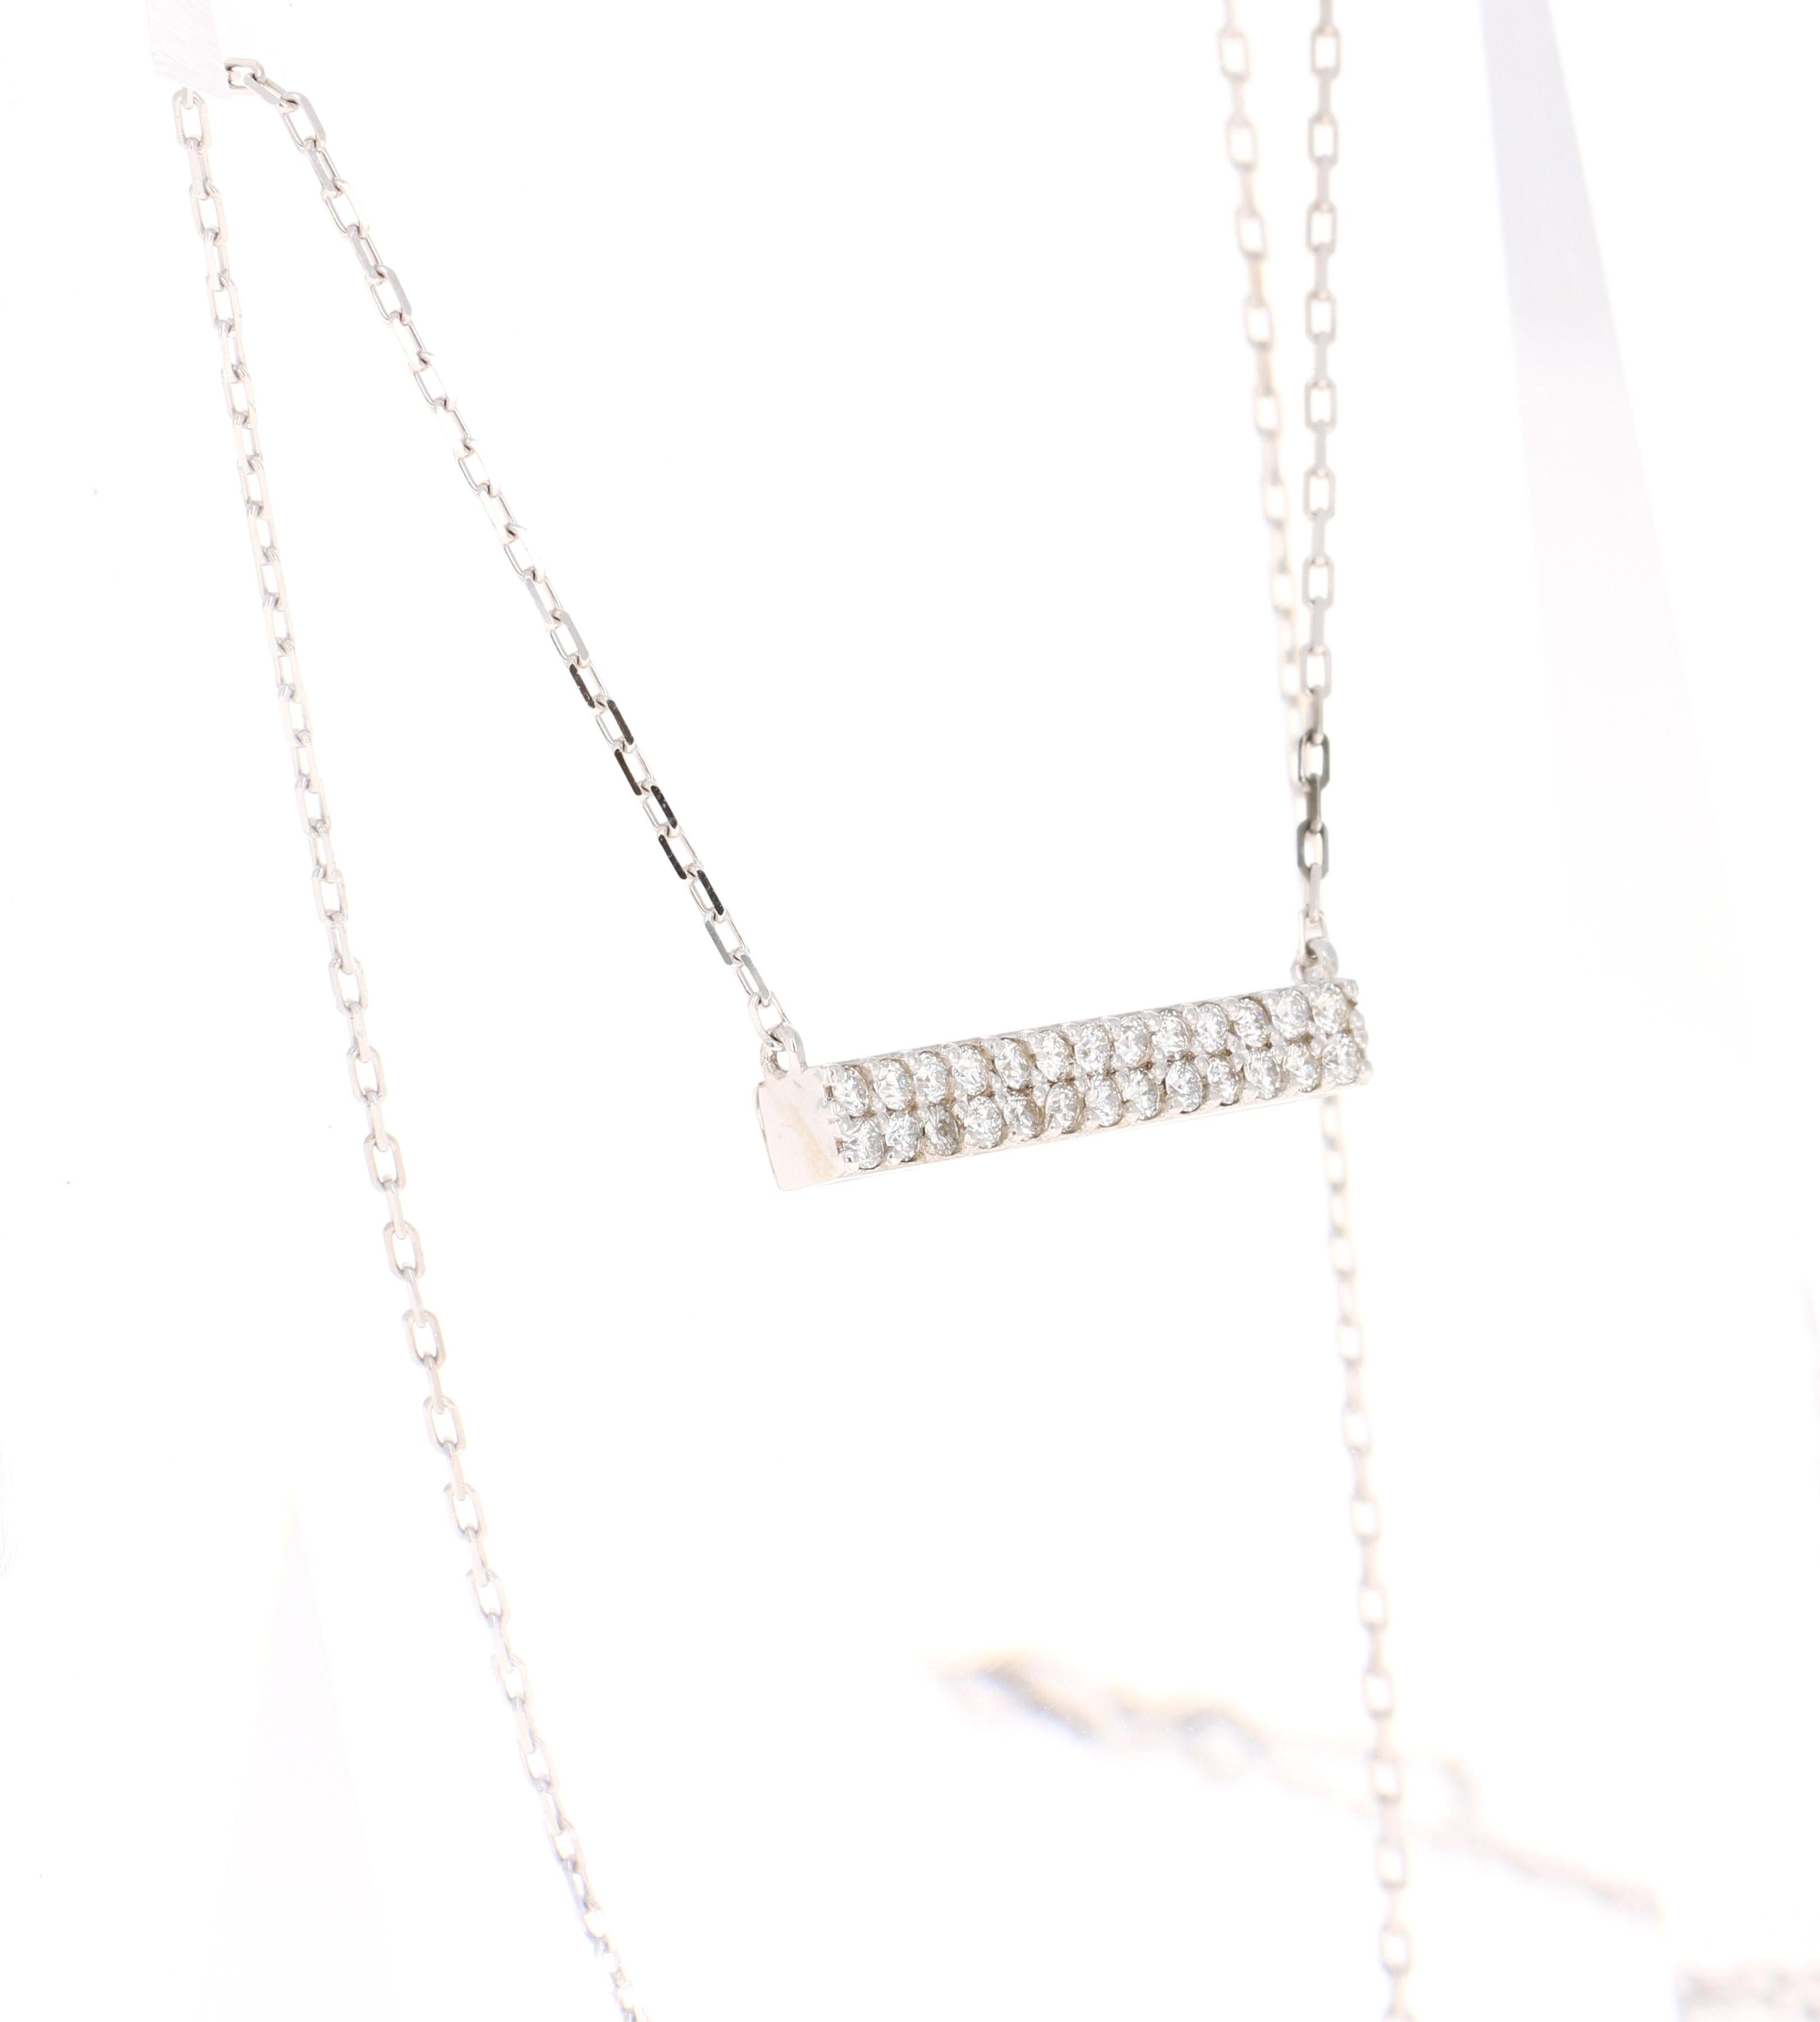 This Chain Necklace has a Diamond Bar that has 26 Round Cut Diamonds (Clarity: SI, Color: F) that weigh 0.41 Carats. The total carat weight of the Pendant is 0.41 Carats.

It is beautifully curated in 14 Karat White Gold and weighs approximately 3.3